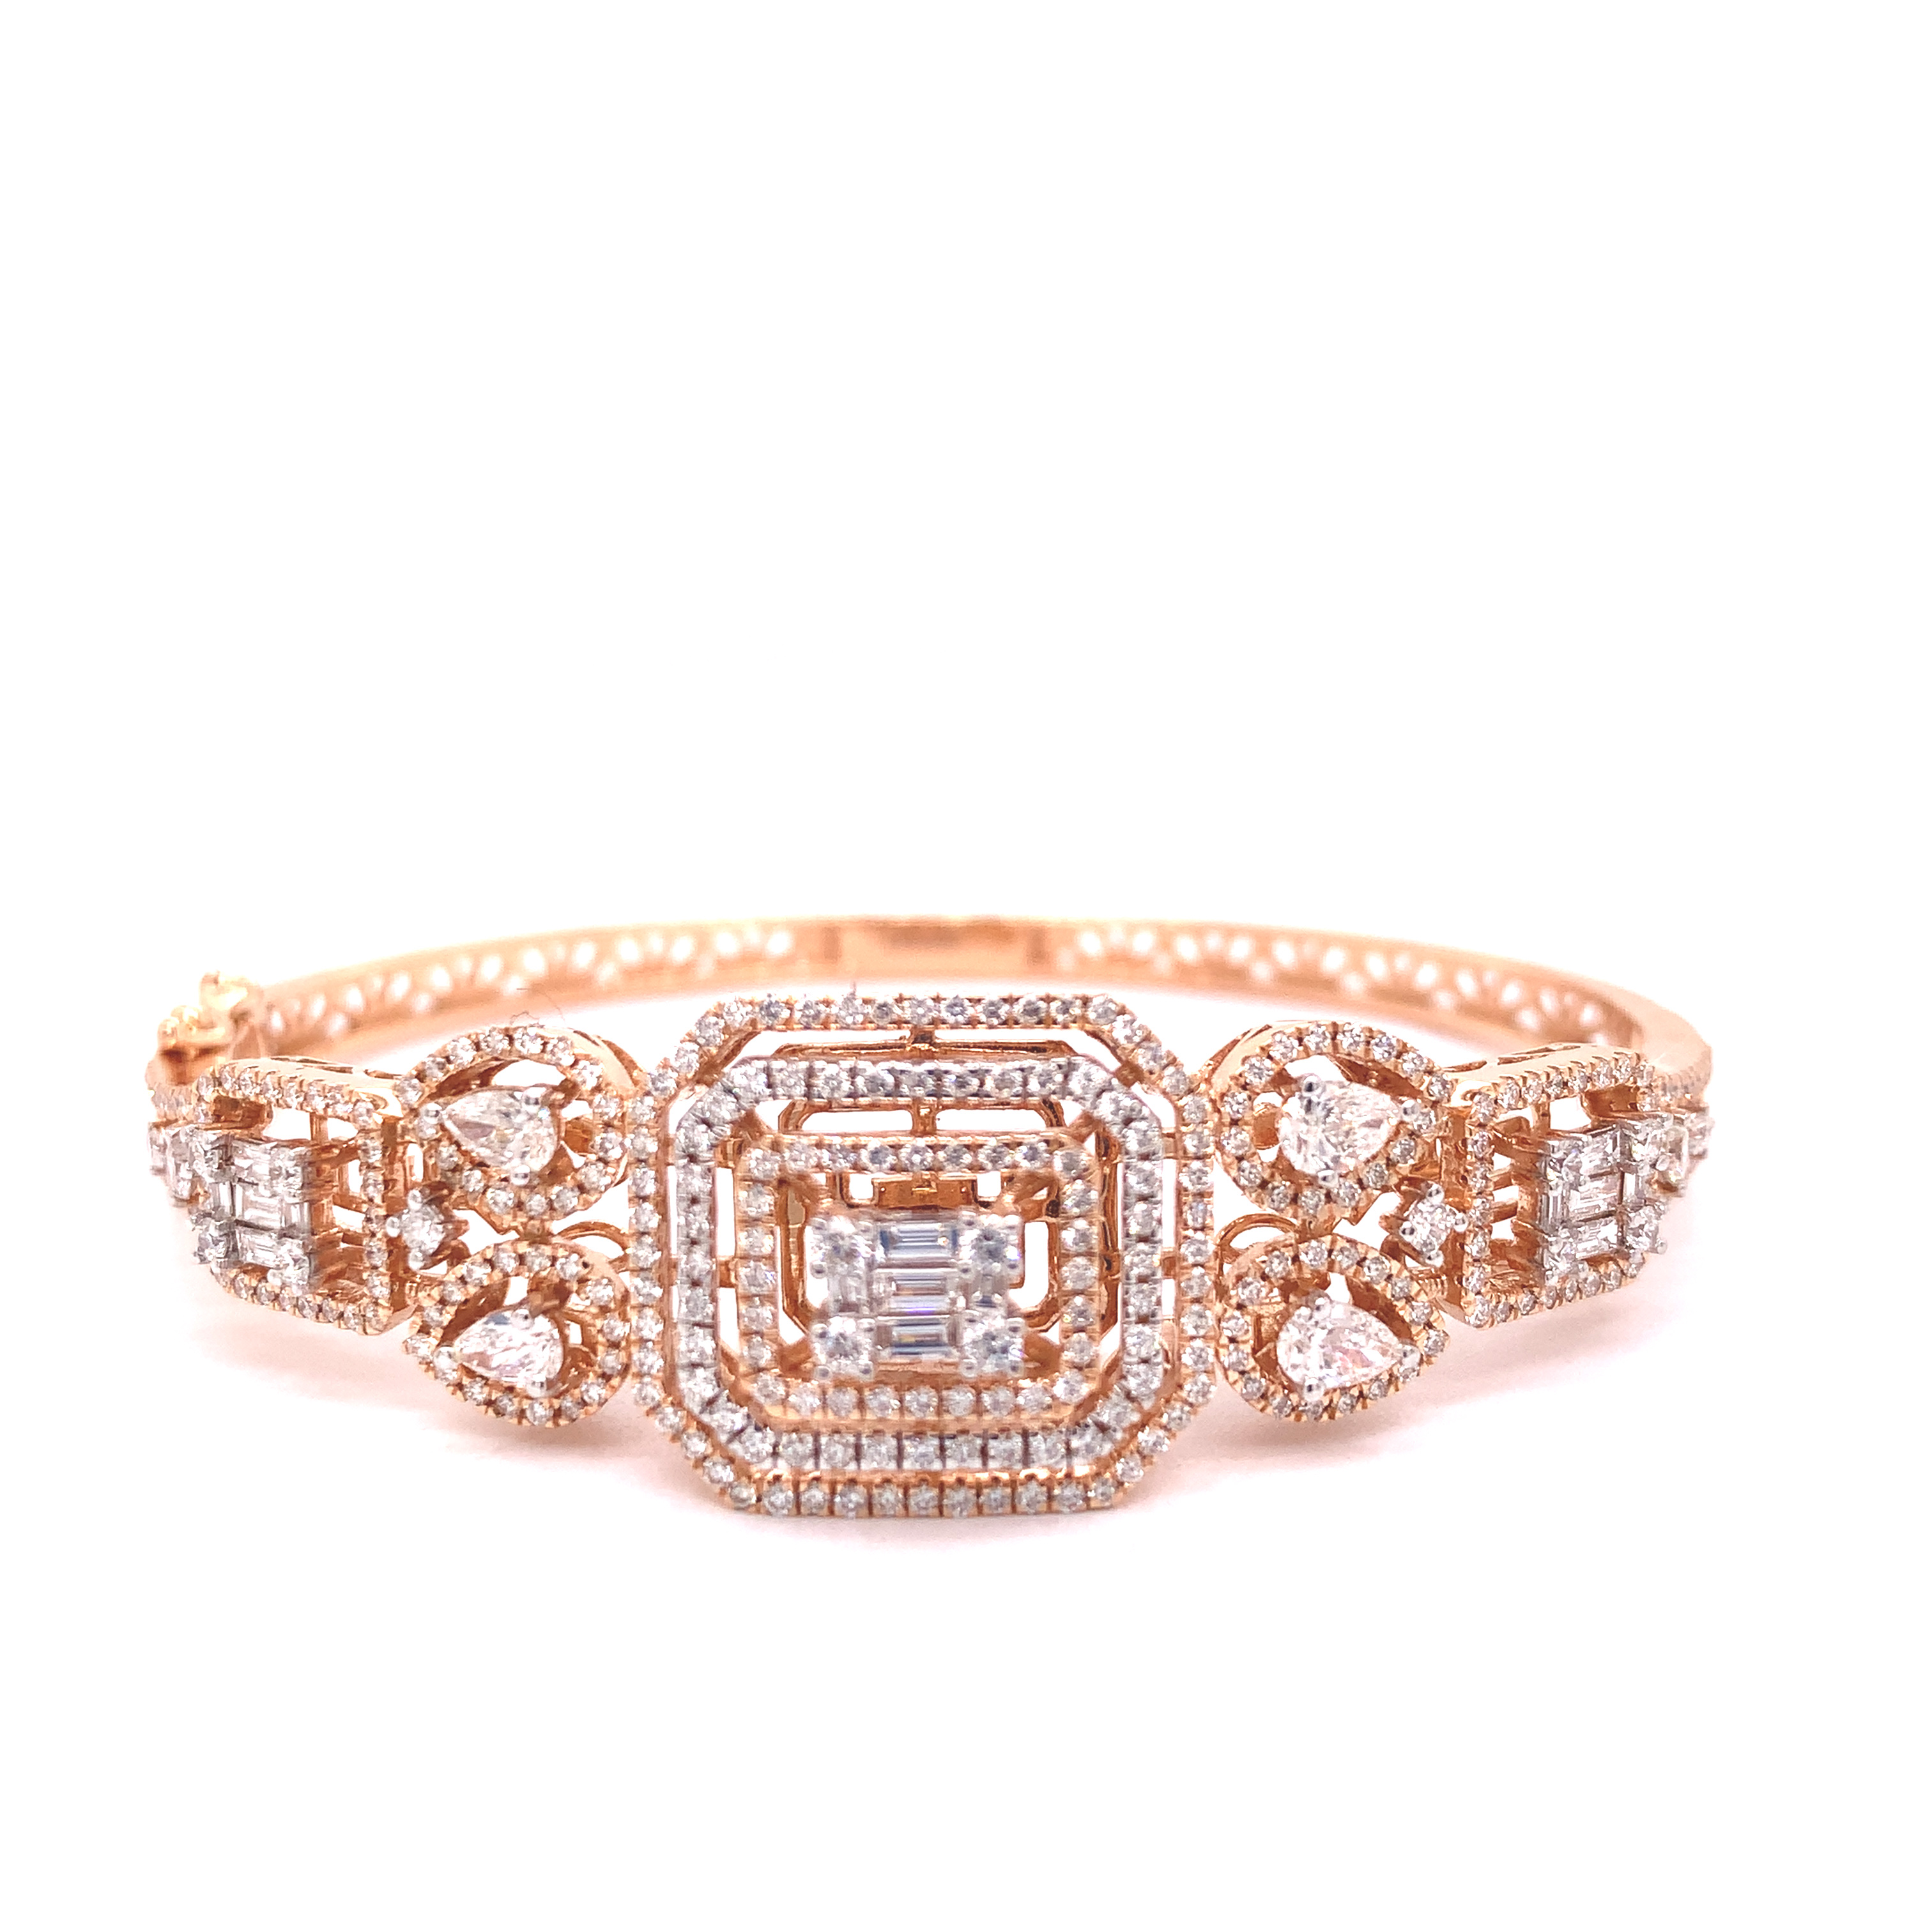 5mm Moissanite Tennis Bracelet – The Real Jewelry Company